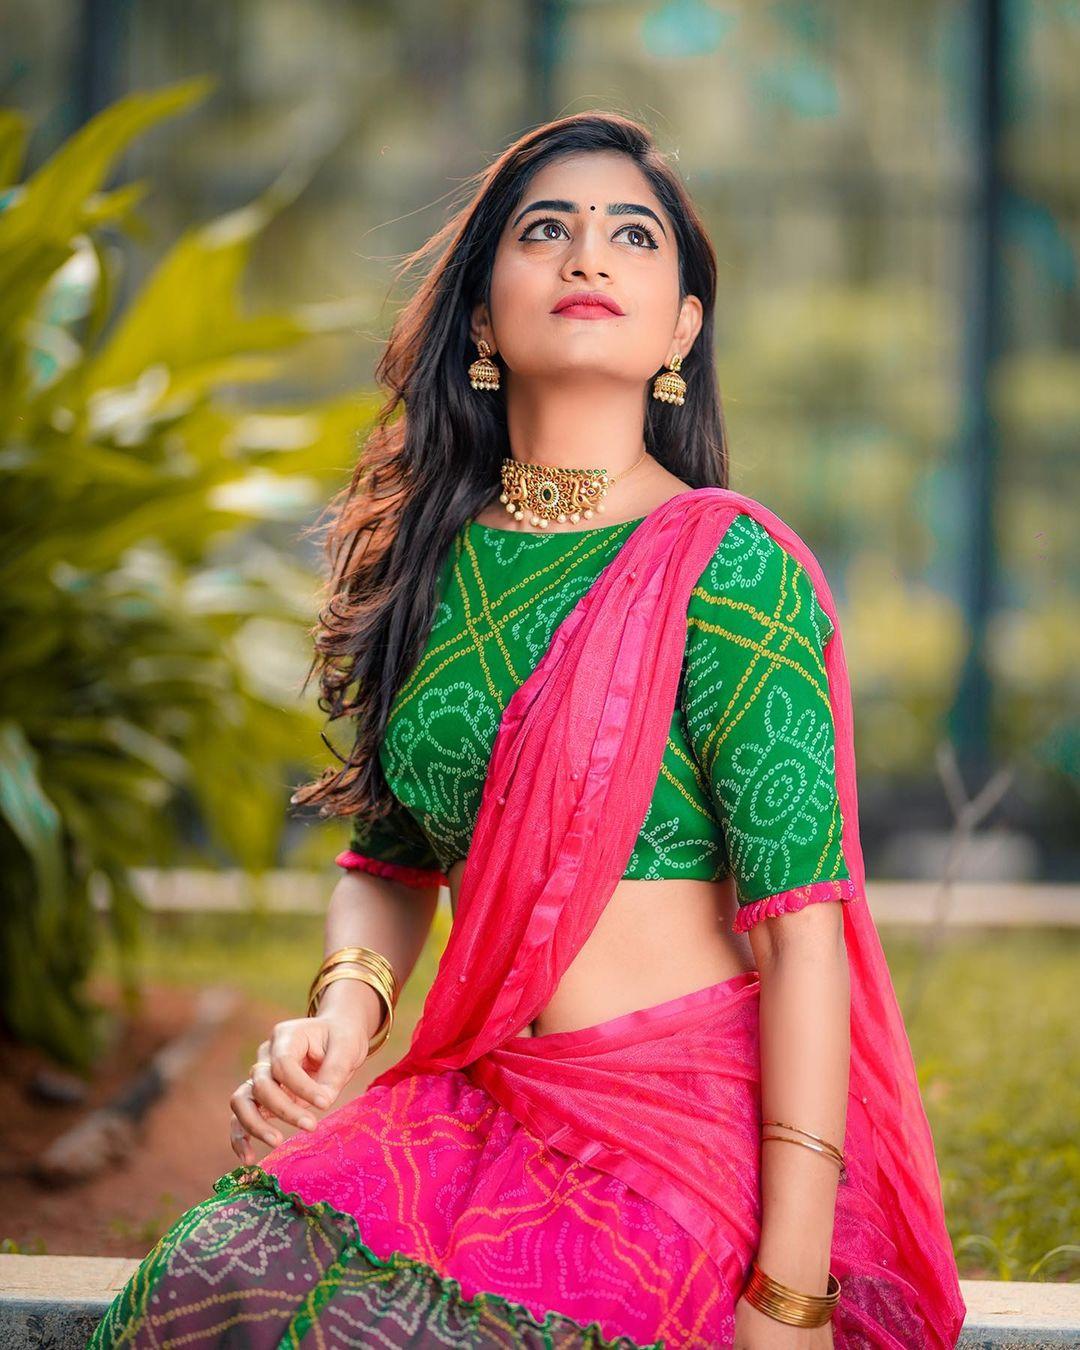 Nayani Pavani Looking Very Glamorous And Sexy Photoshoot In Saree Photos Hd Images Pictures